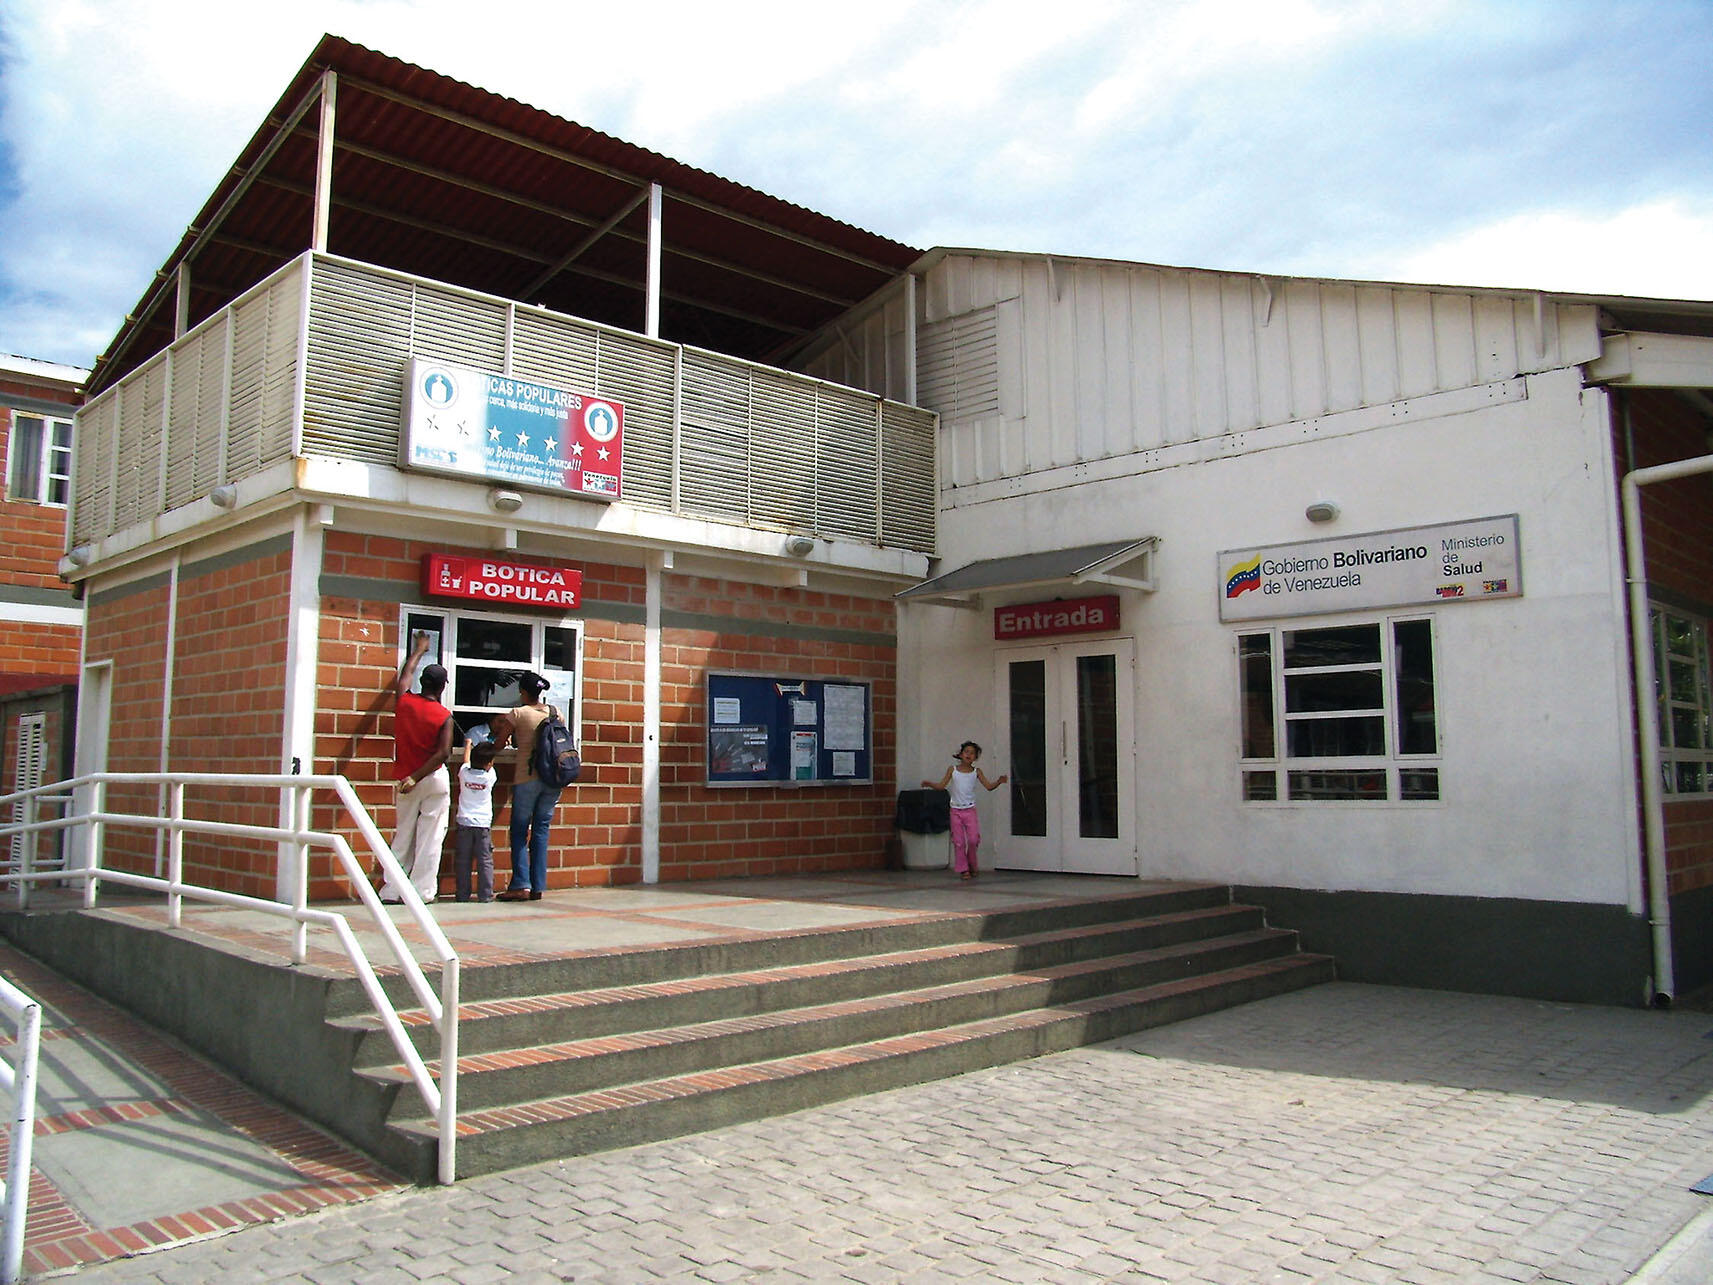 One of the health clinics established throughout the country by the Chávez regime. (Photo by Ariel López.)